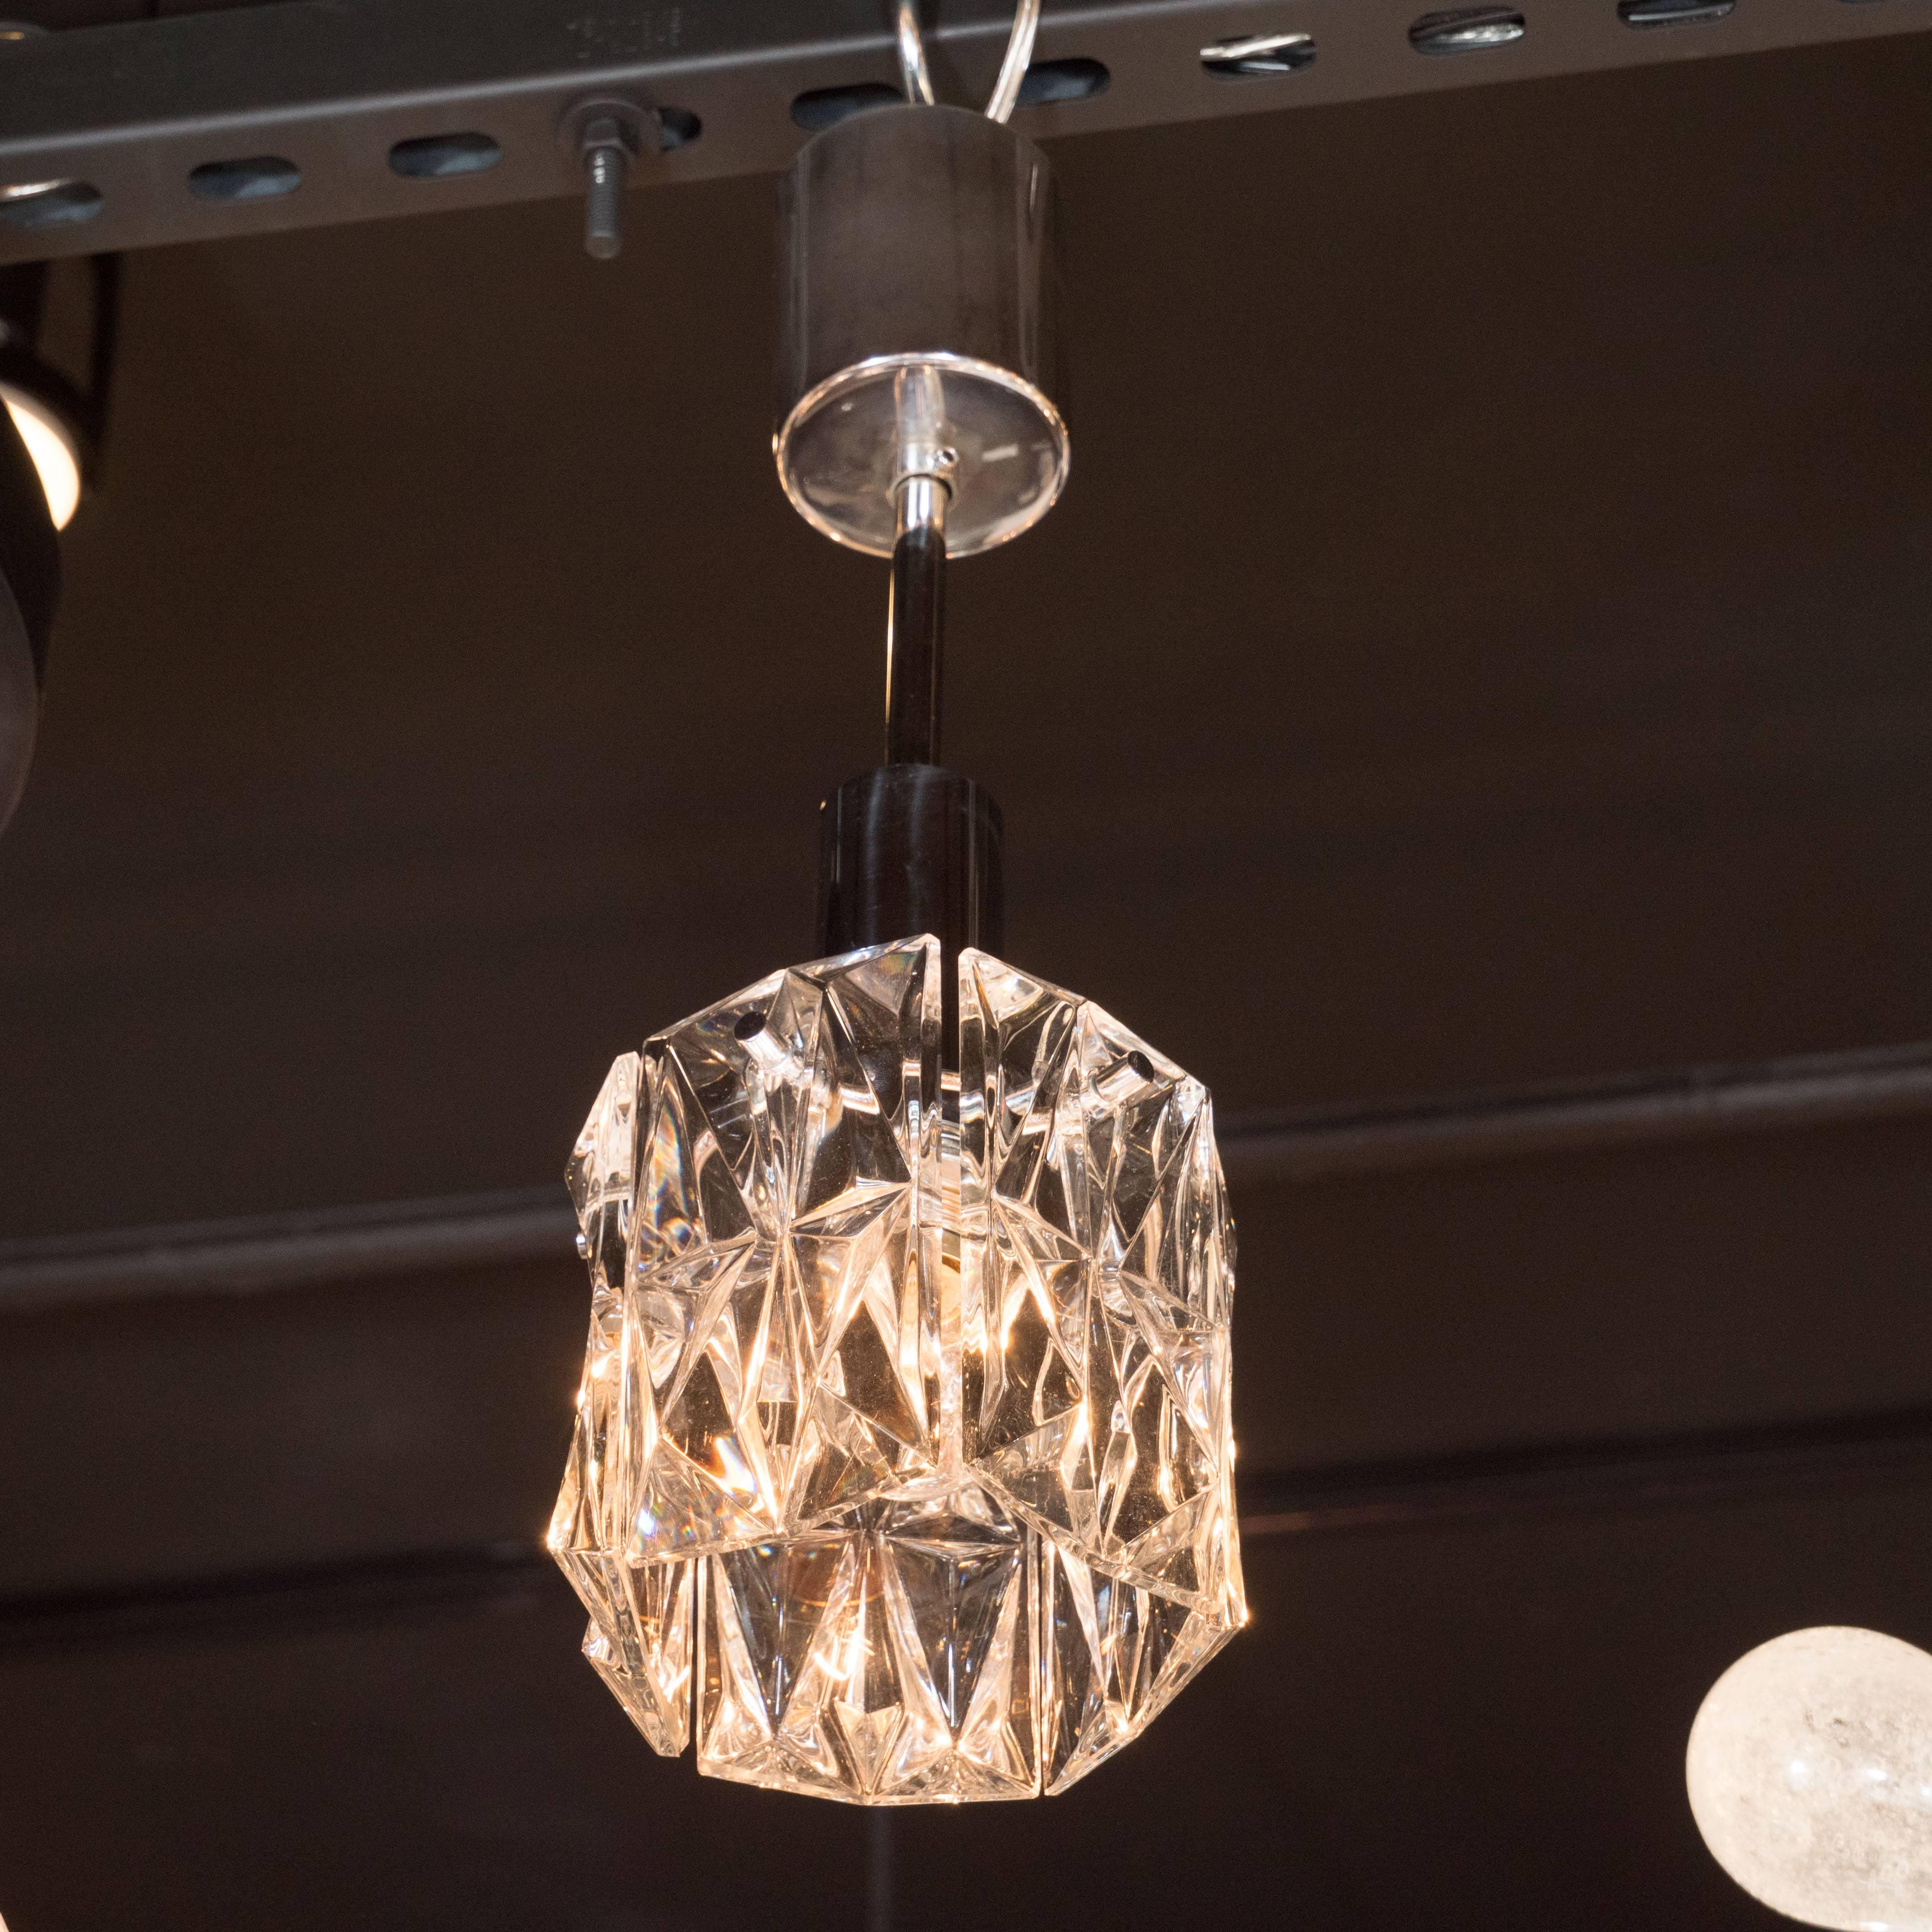 This sophisticated Mid-Century Modern pendant features a single glass shade replete with an abundance of raised geometric patterns etched into its surface, refracting light like a perfectly cut diamond. Produced in Austria by the esteemed producer